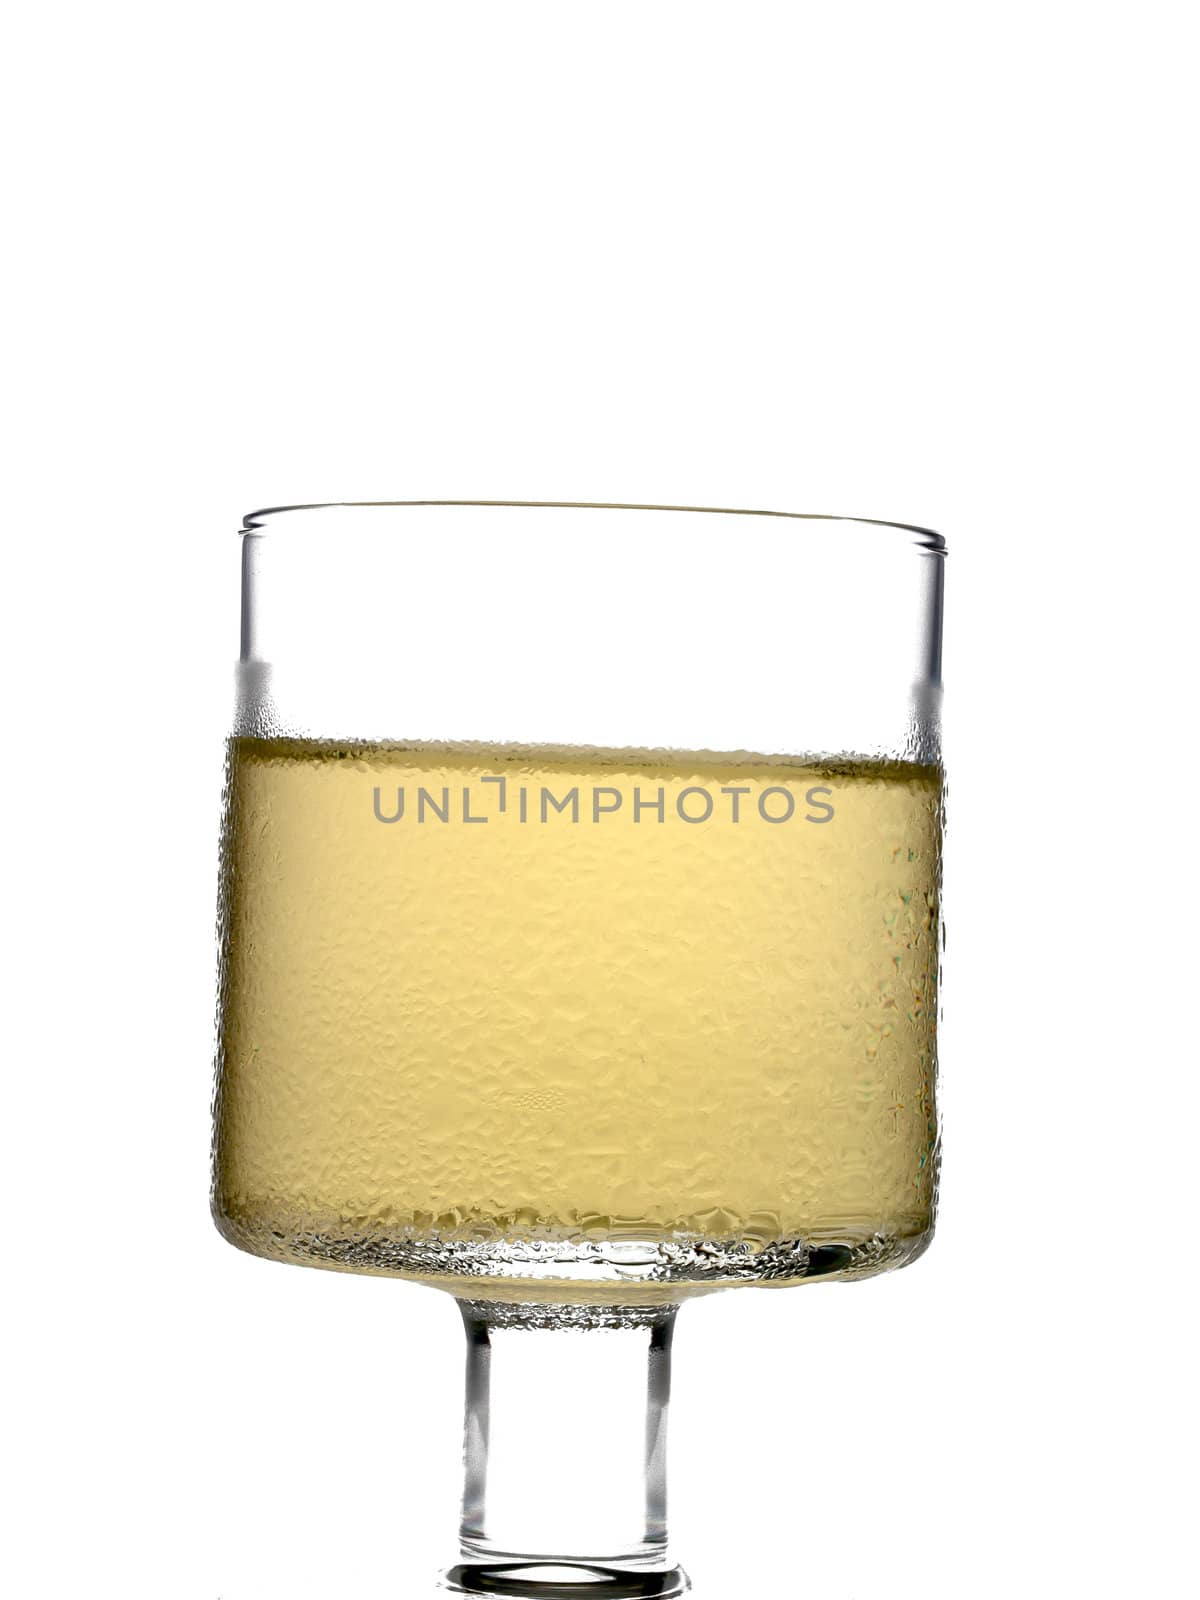 glass isolated on white background